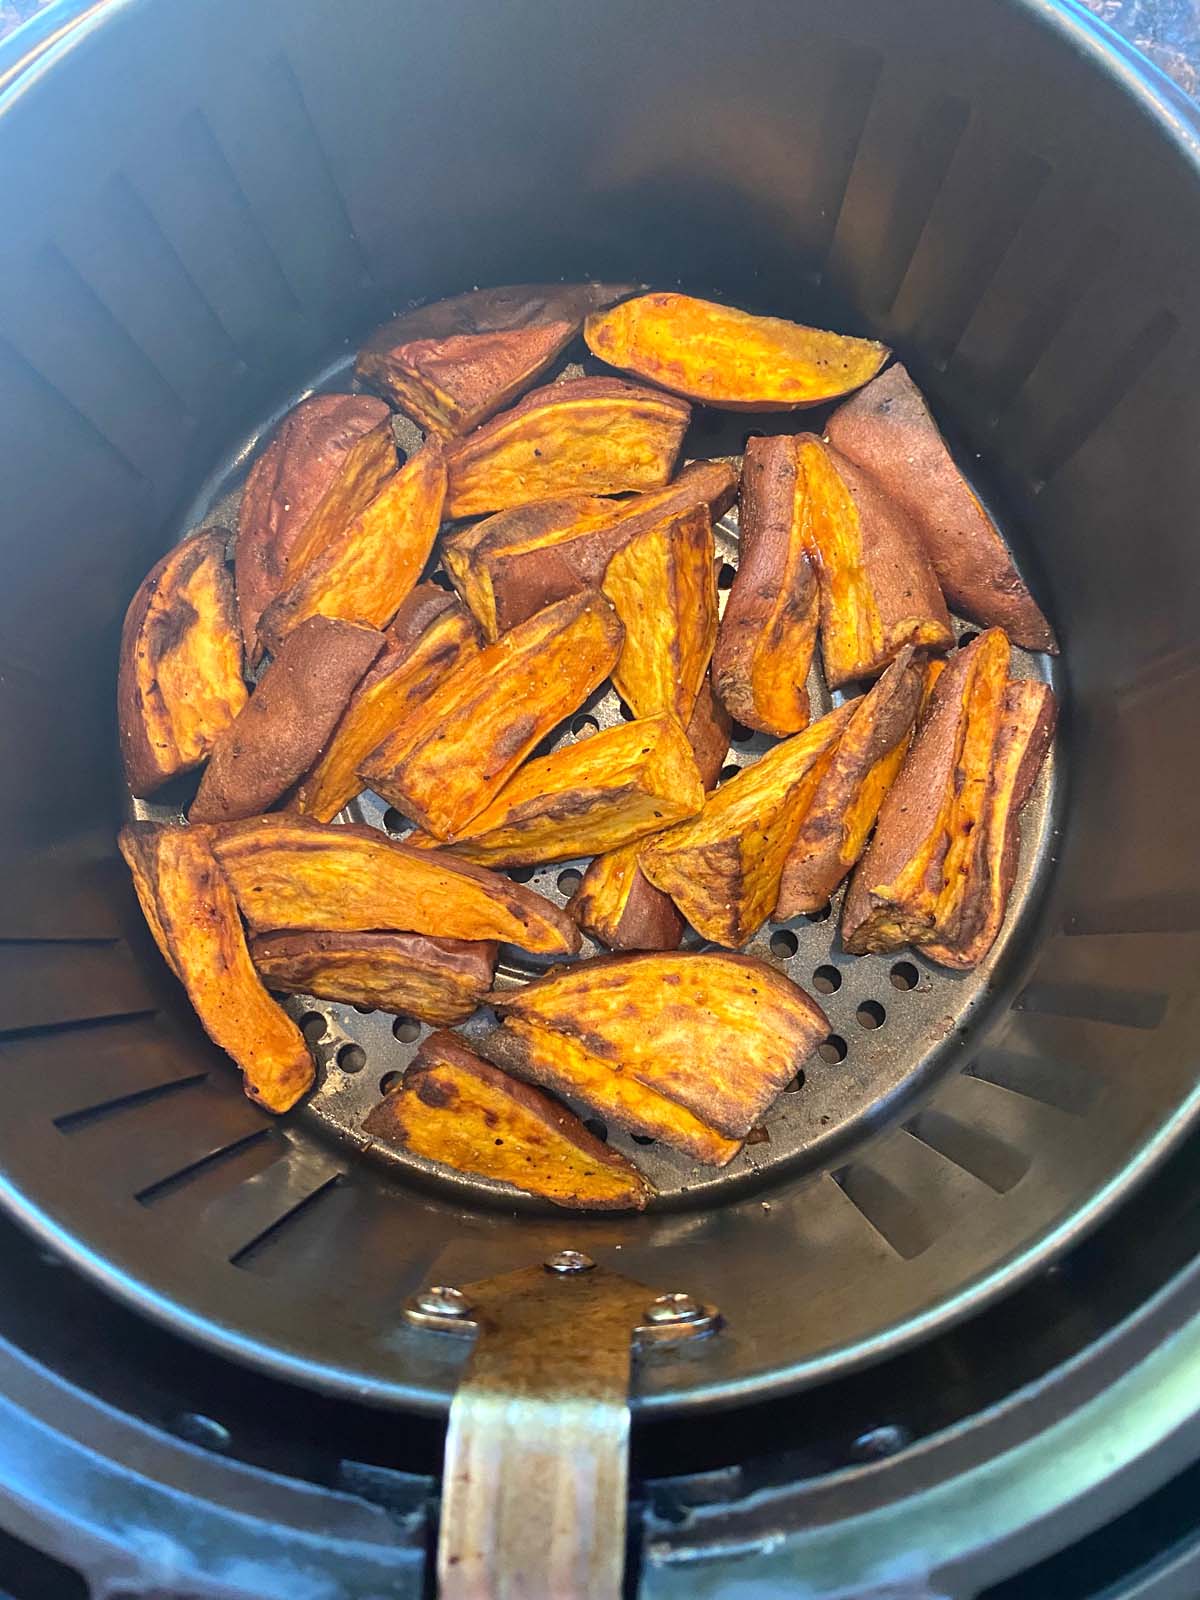 Cooked sweet potato wedges in an air fryer.